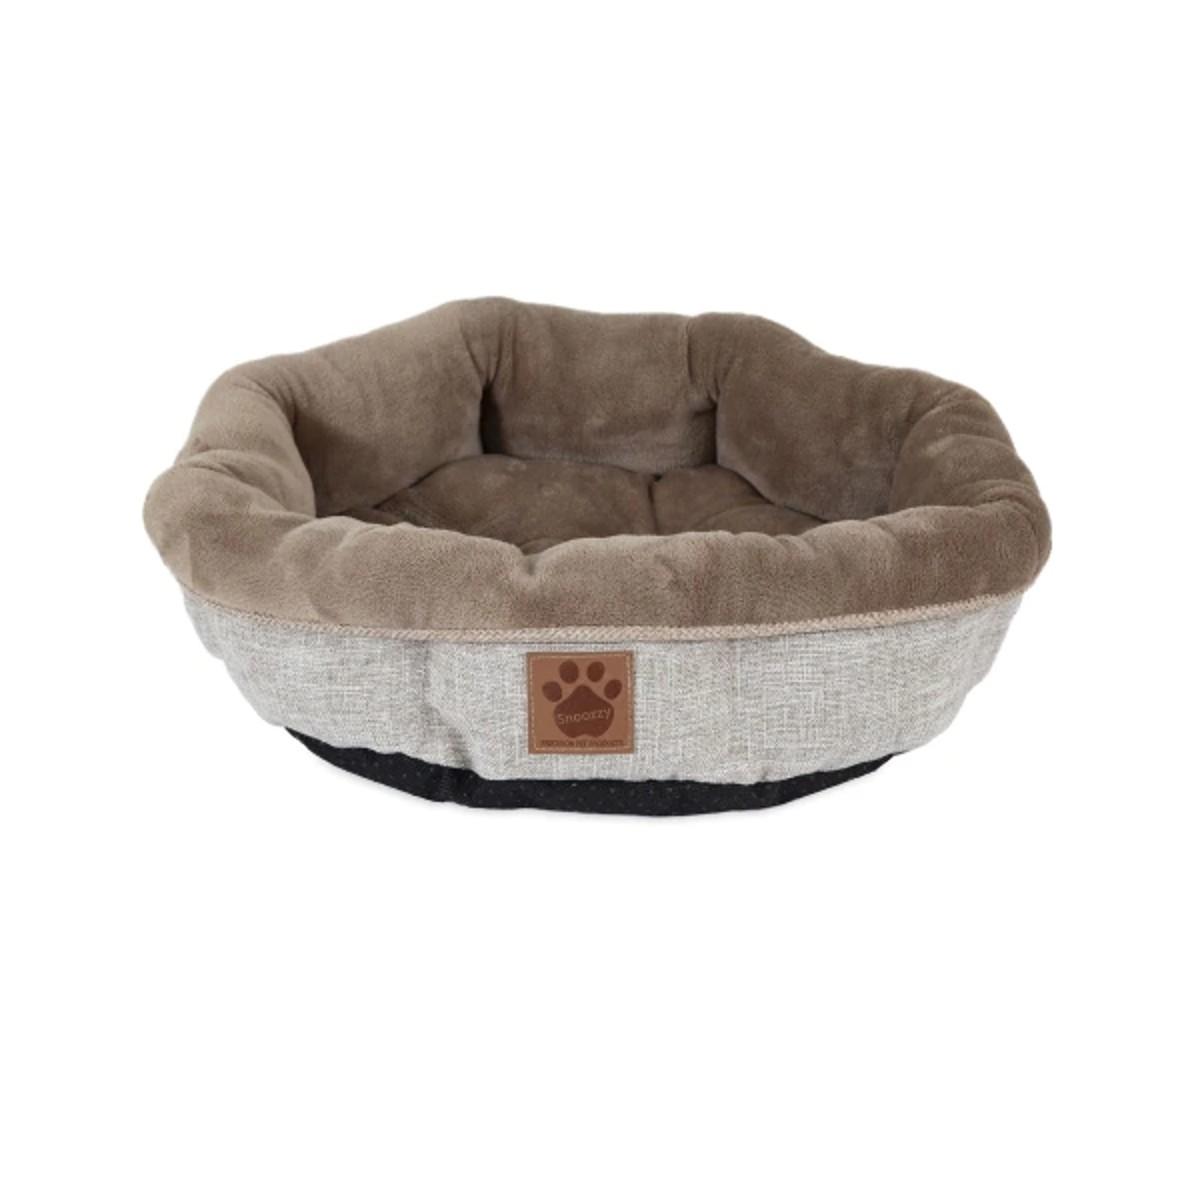 SnooZZy Rustic Elegance Shearling Round Dog Bed - Buff